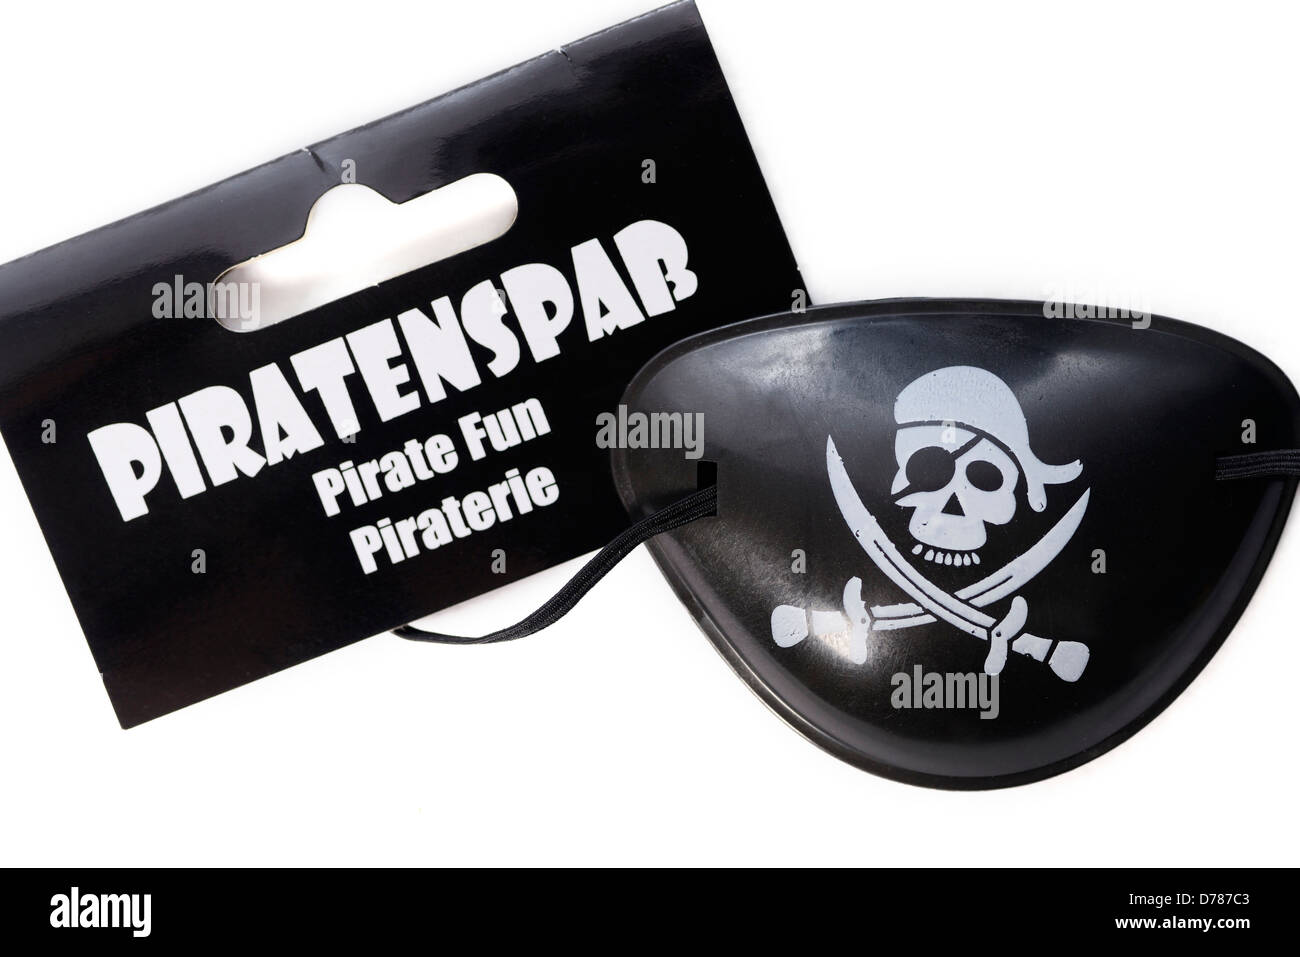 Pirate's eye patch, symbolic photo pirate's party Stock Photo